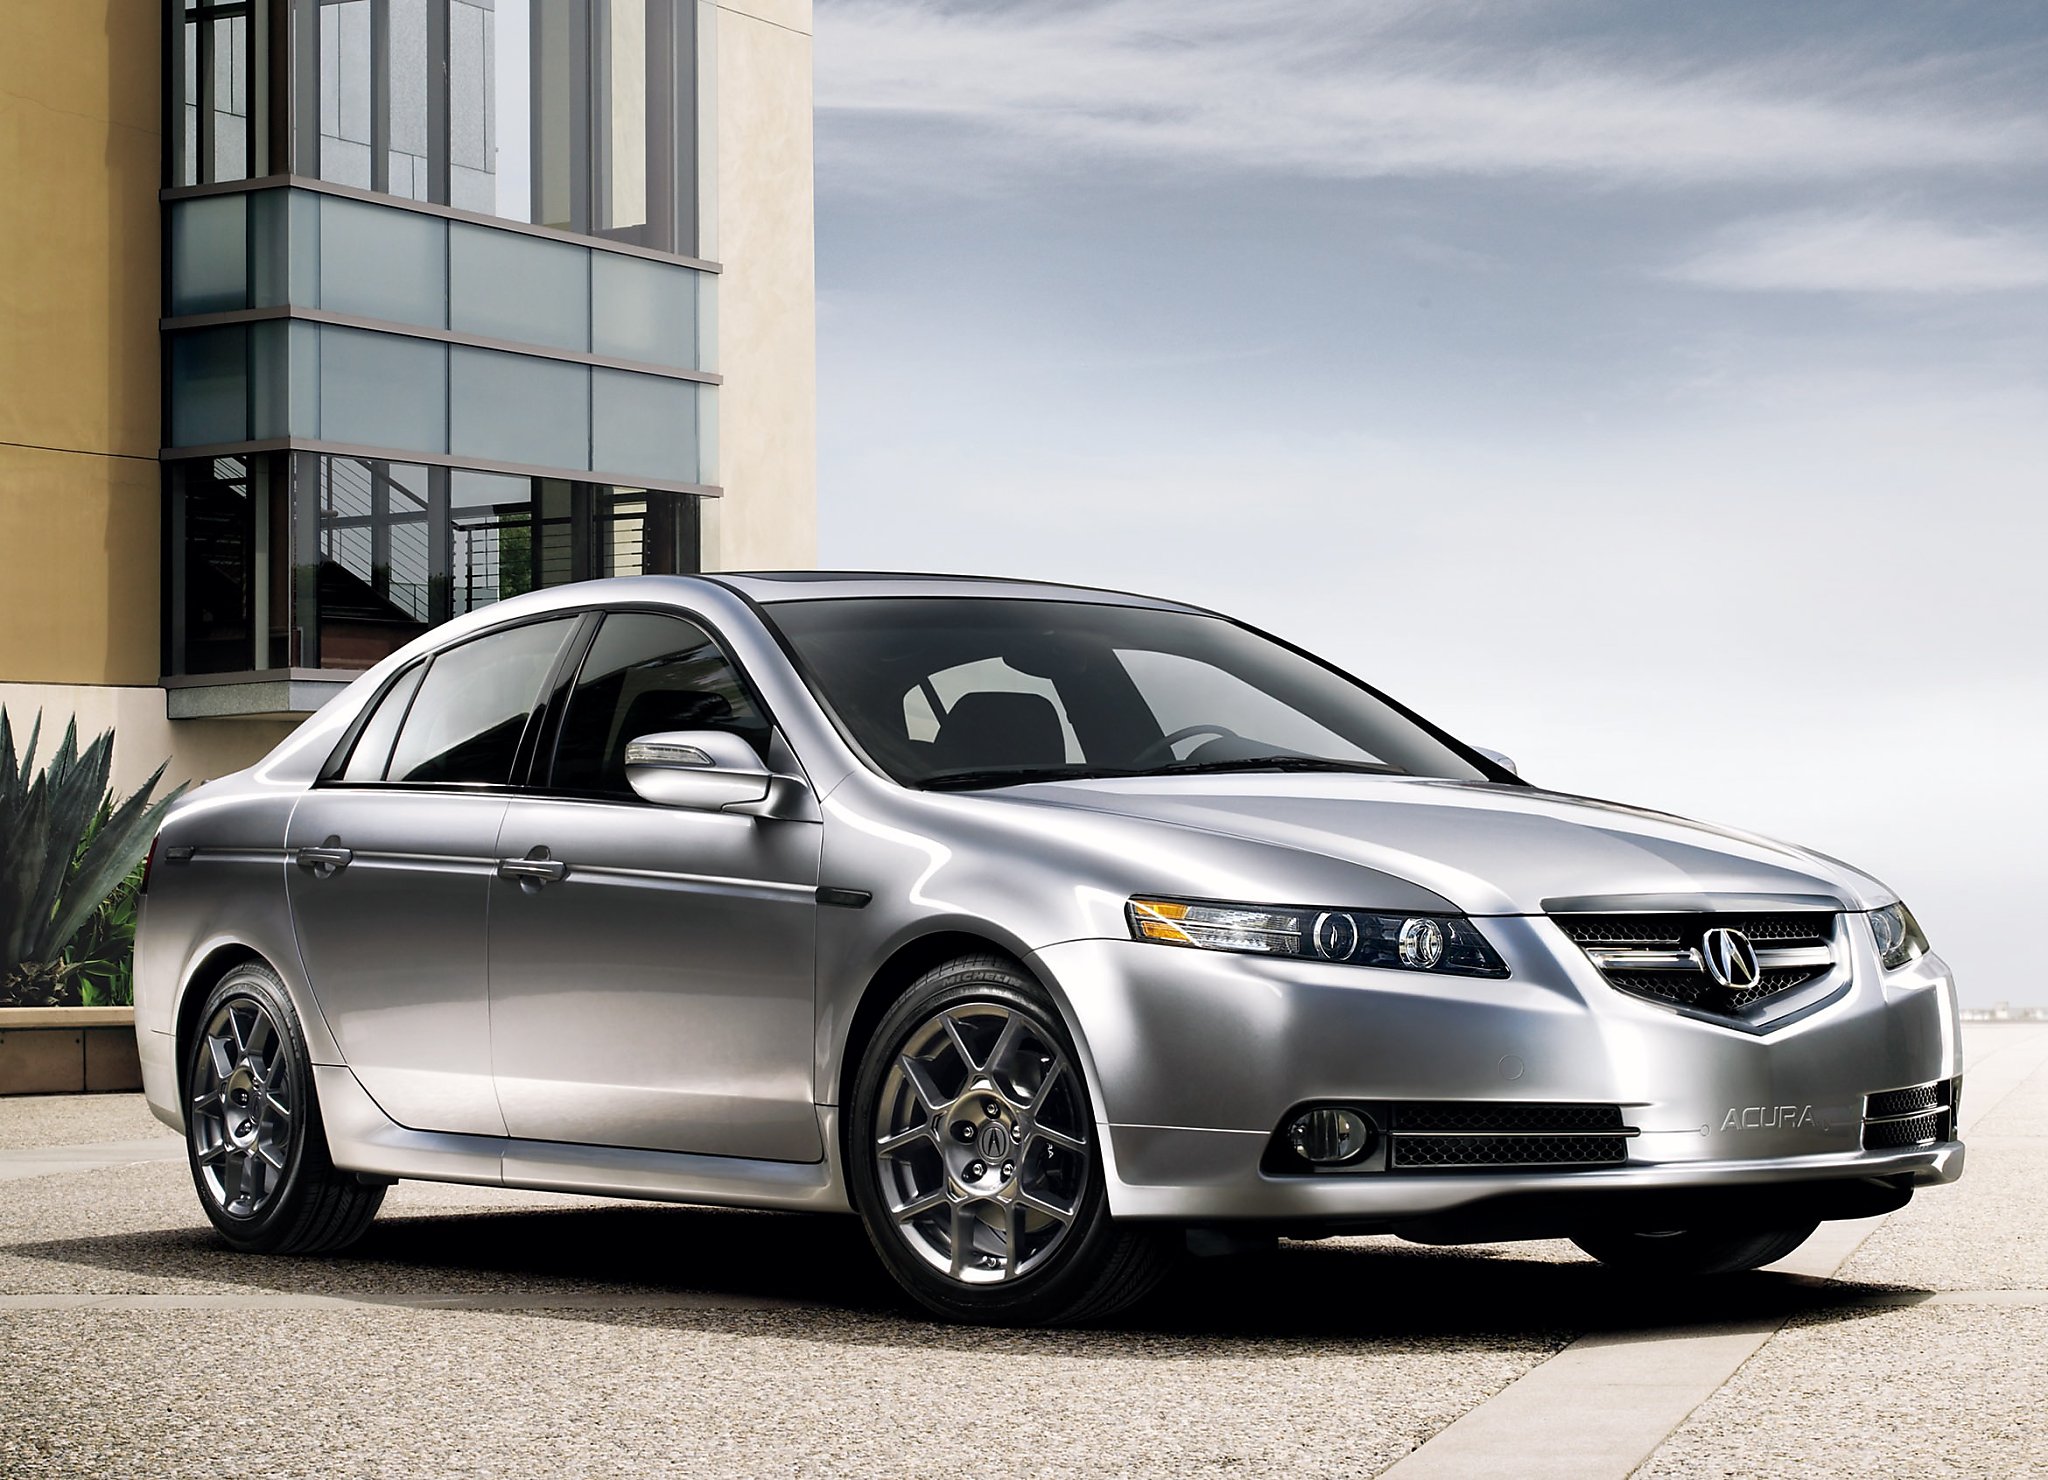 The 11 best used cars under $10,000 for 2015